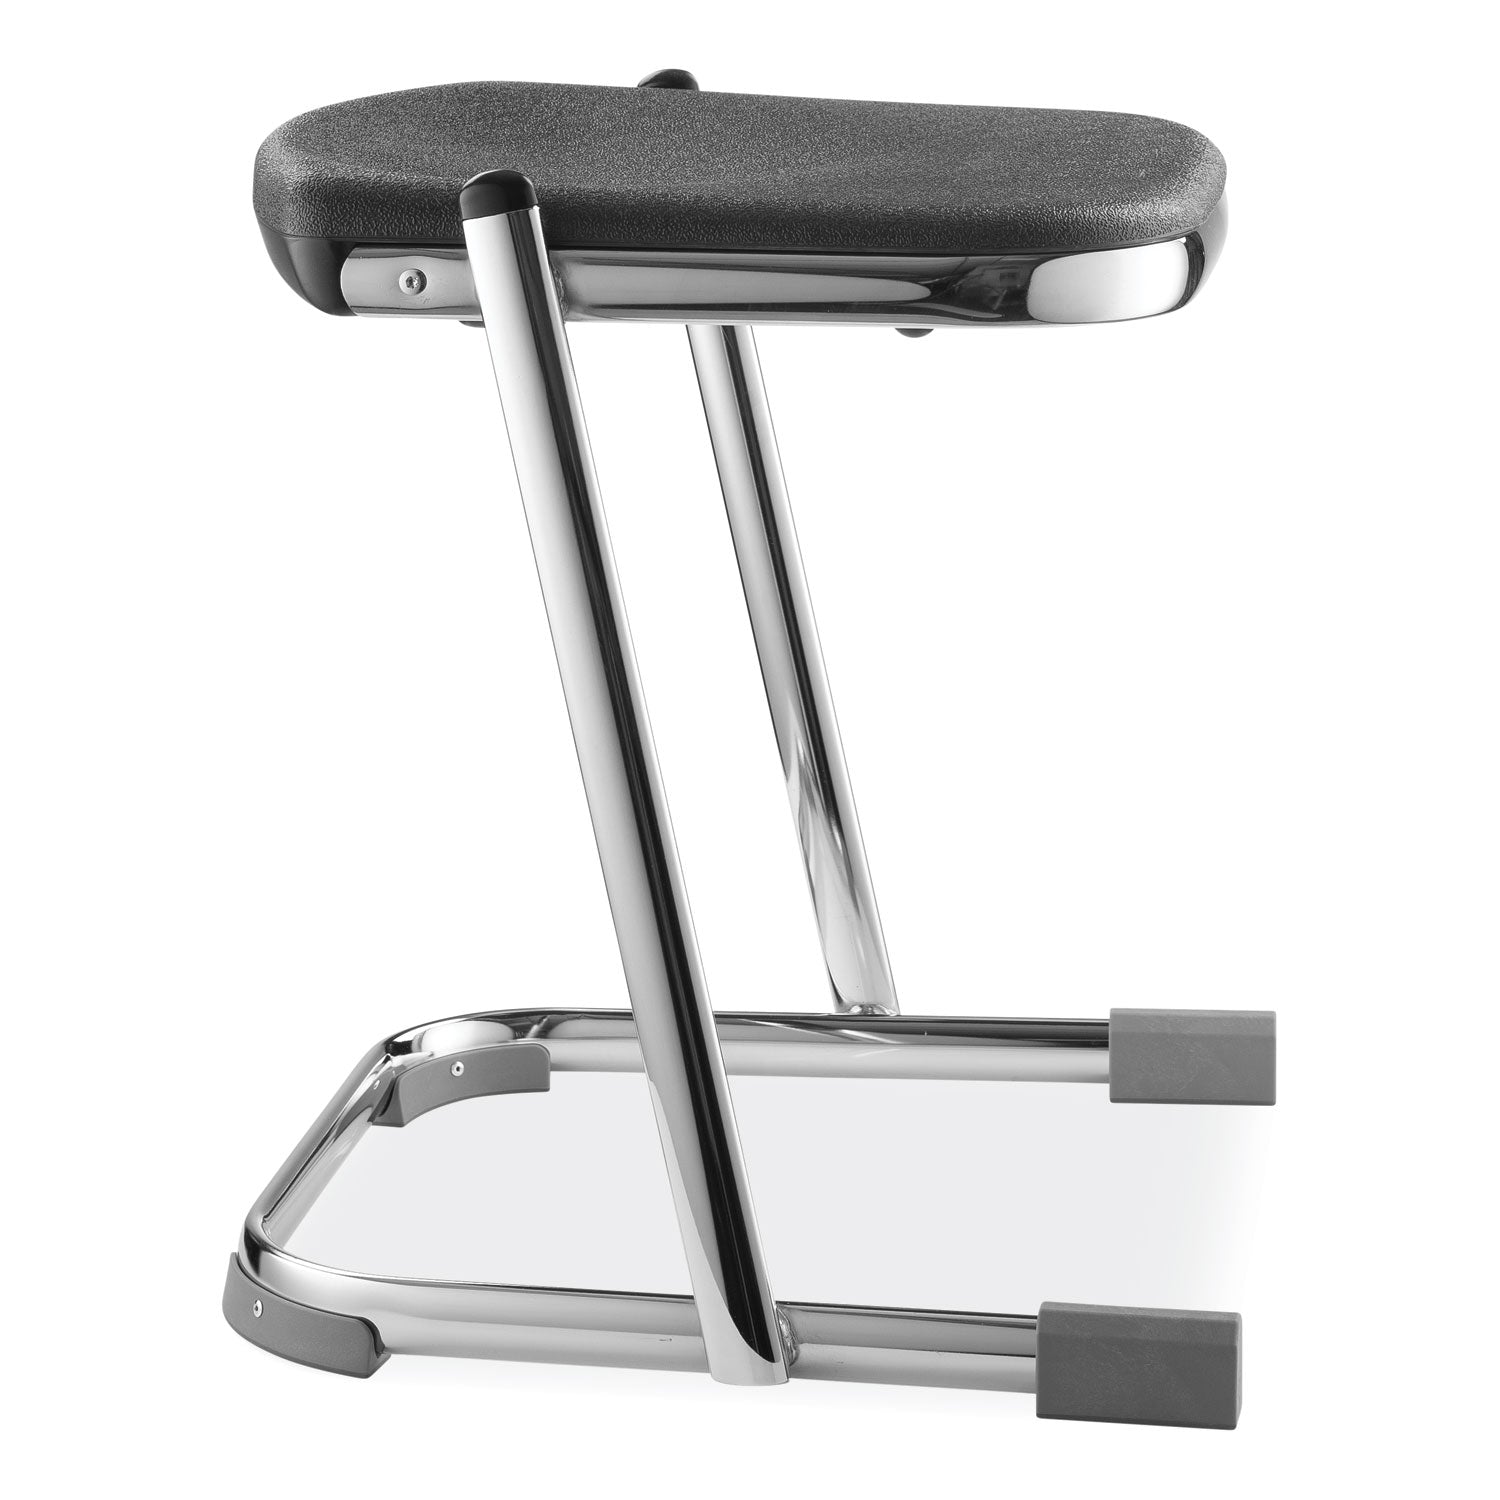 6600-series-elephant-z-stool-backless-supports-up-to-500lb-18-seat-height-black-seat-chrome-frameships-in-1-3-bus-days_nps6618 - 4